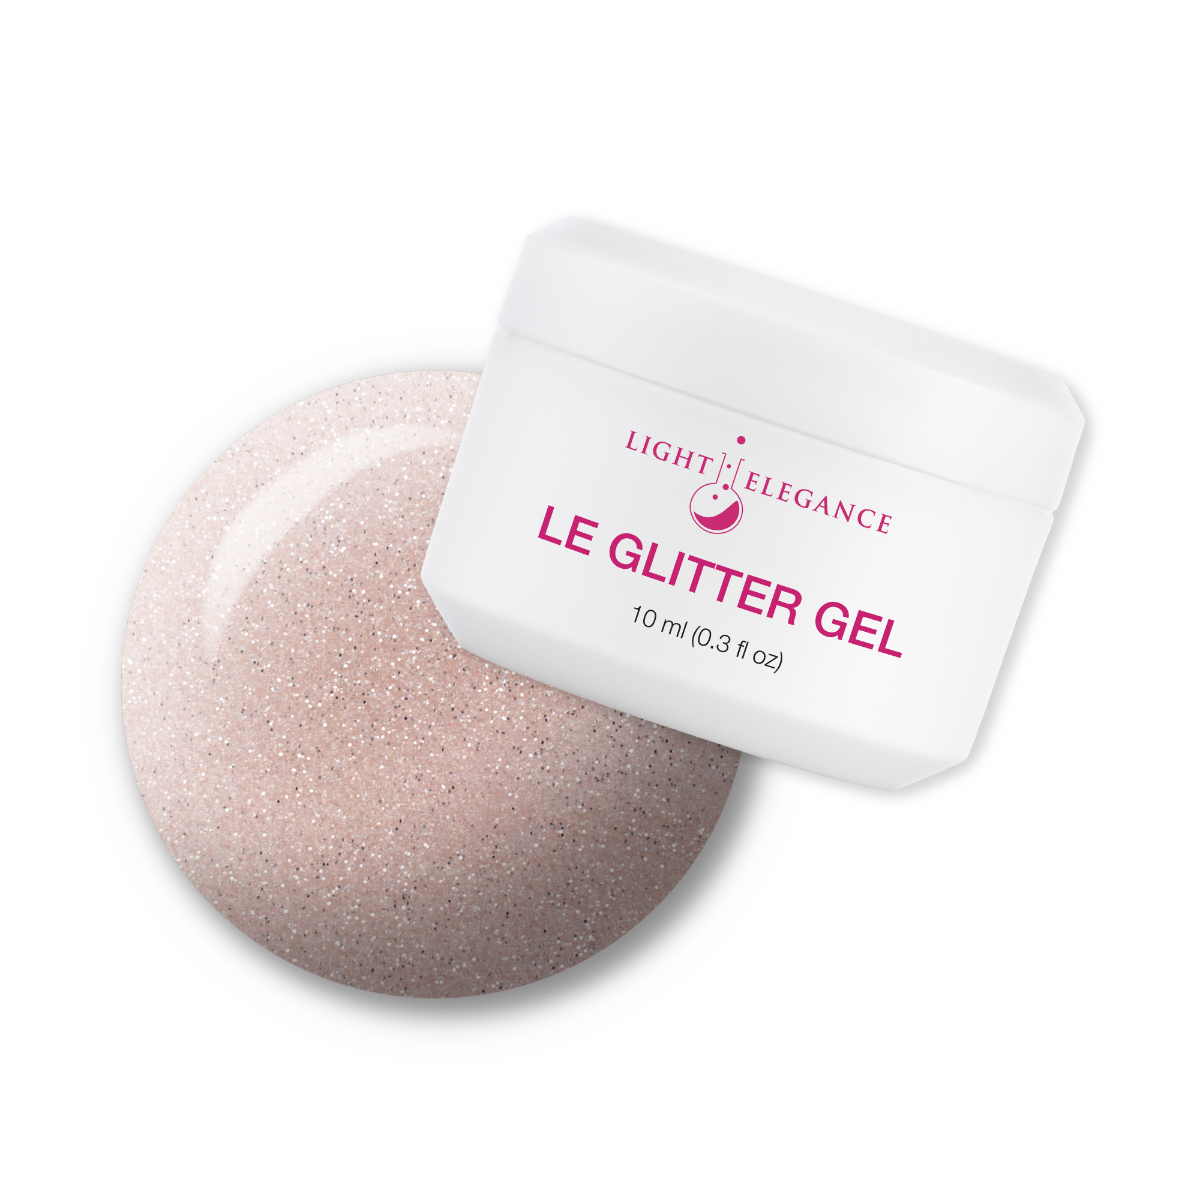 Light Elegance Glitter Gel - A Couple of Coconuts :: New Packaging - Creata Beauty - Professional Beauty Products